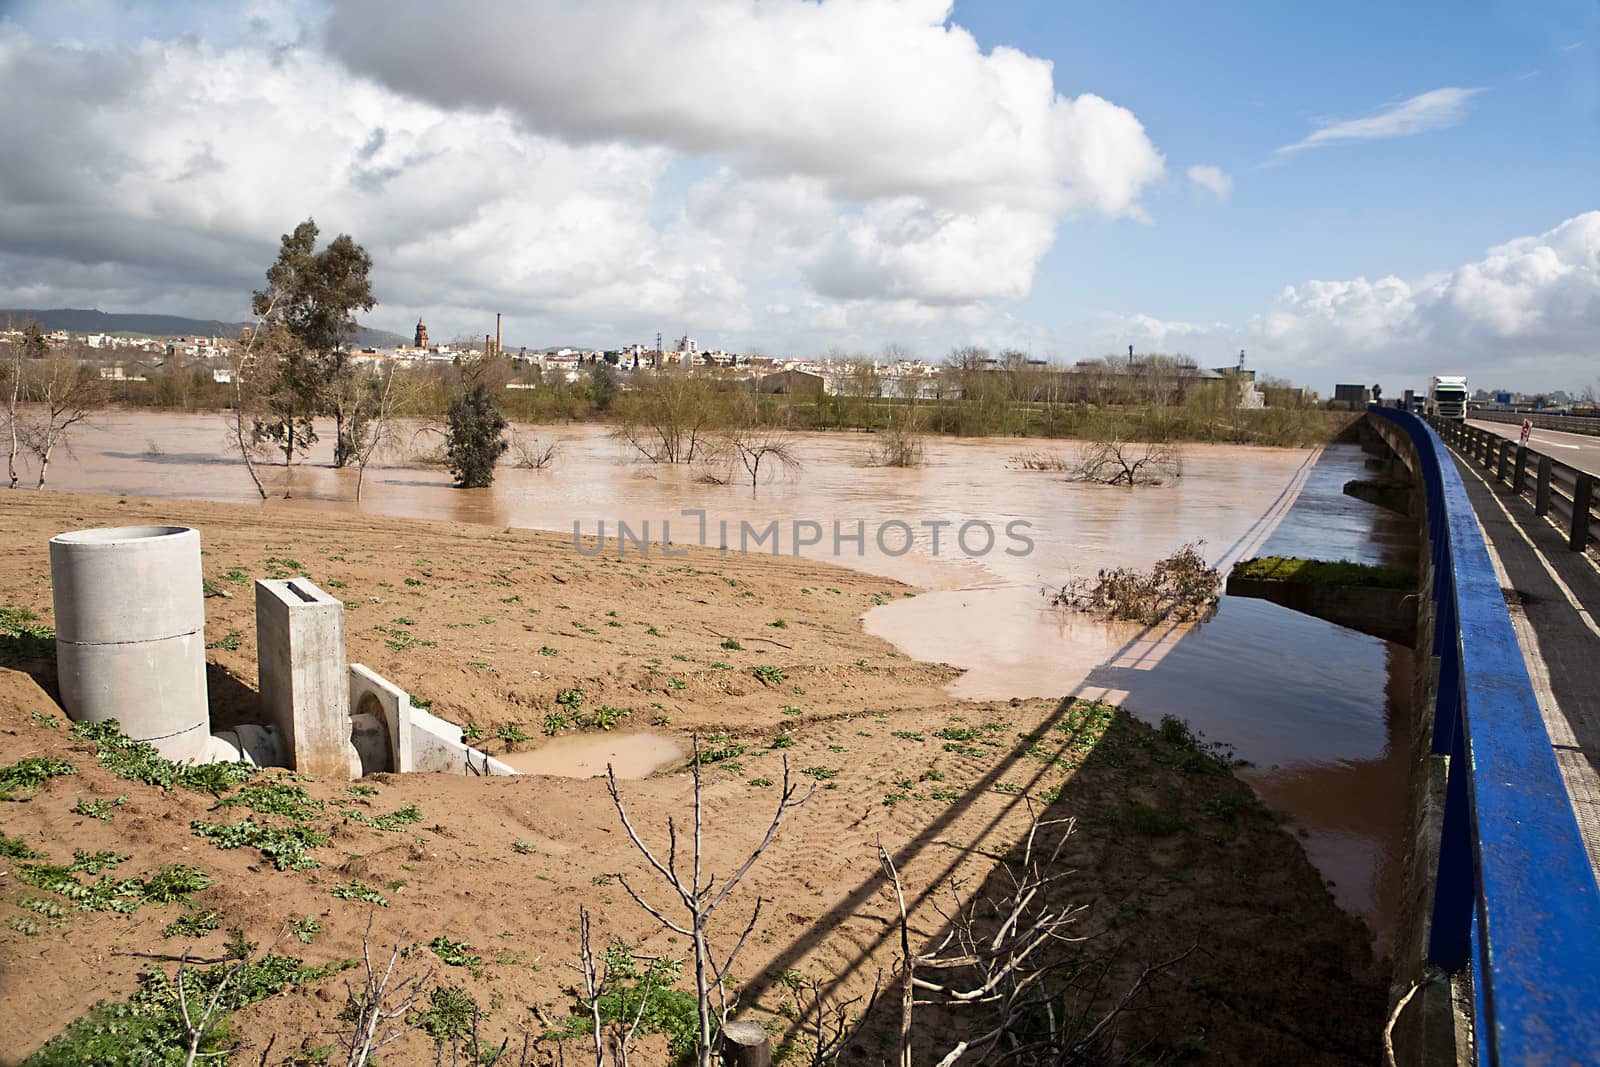 Guadalquivir river overflowed to its passage over the bridge of a road, Andujar, Jaen province, Andalusia, Spain